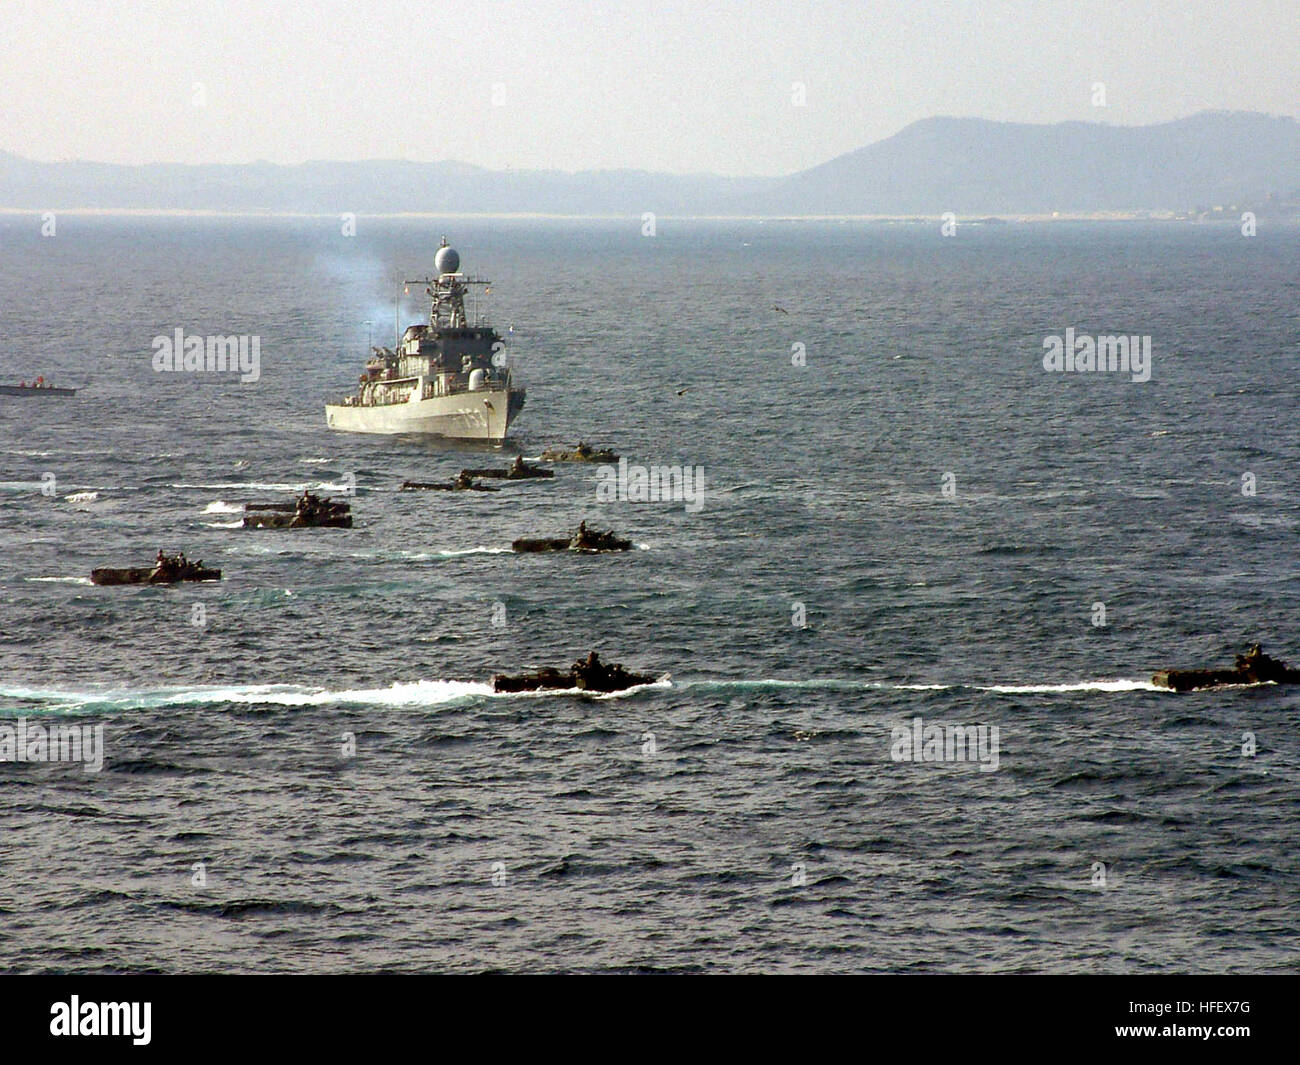 040326-N-6482H-003 At sea aboard USS Fort McHenry (LSD 43) Mar. 26, 2004 - Amphibious Assault Vehicles (AAV) assigned to Battalion Landing Team (BLT) 2/3 and the Republic of Korea group together in front of Republic of Korea Tank Landing Ship Seongin Bong (LST 685) in preparation of a beach landing during Exercise Reception, Staging, Onward movement and Integration (RSOI) and Foal Eagle. RSOI and Foal Eagle are a combined exercise involving forces from the United States and the Republic of Korea to enhance training opportunities and teach, coach and mentor service members, while exercising sen Stock Photo